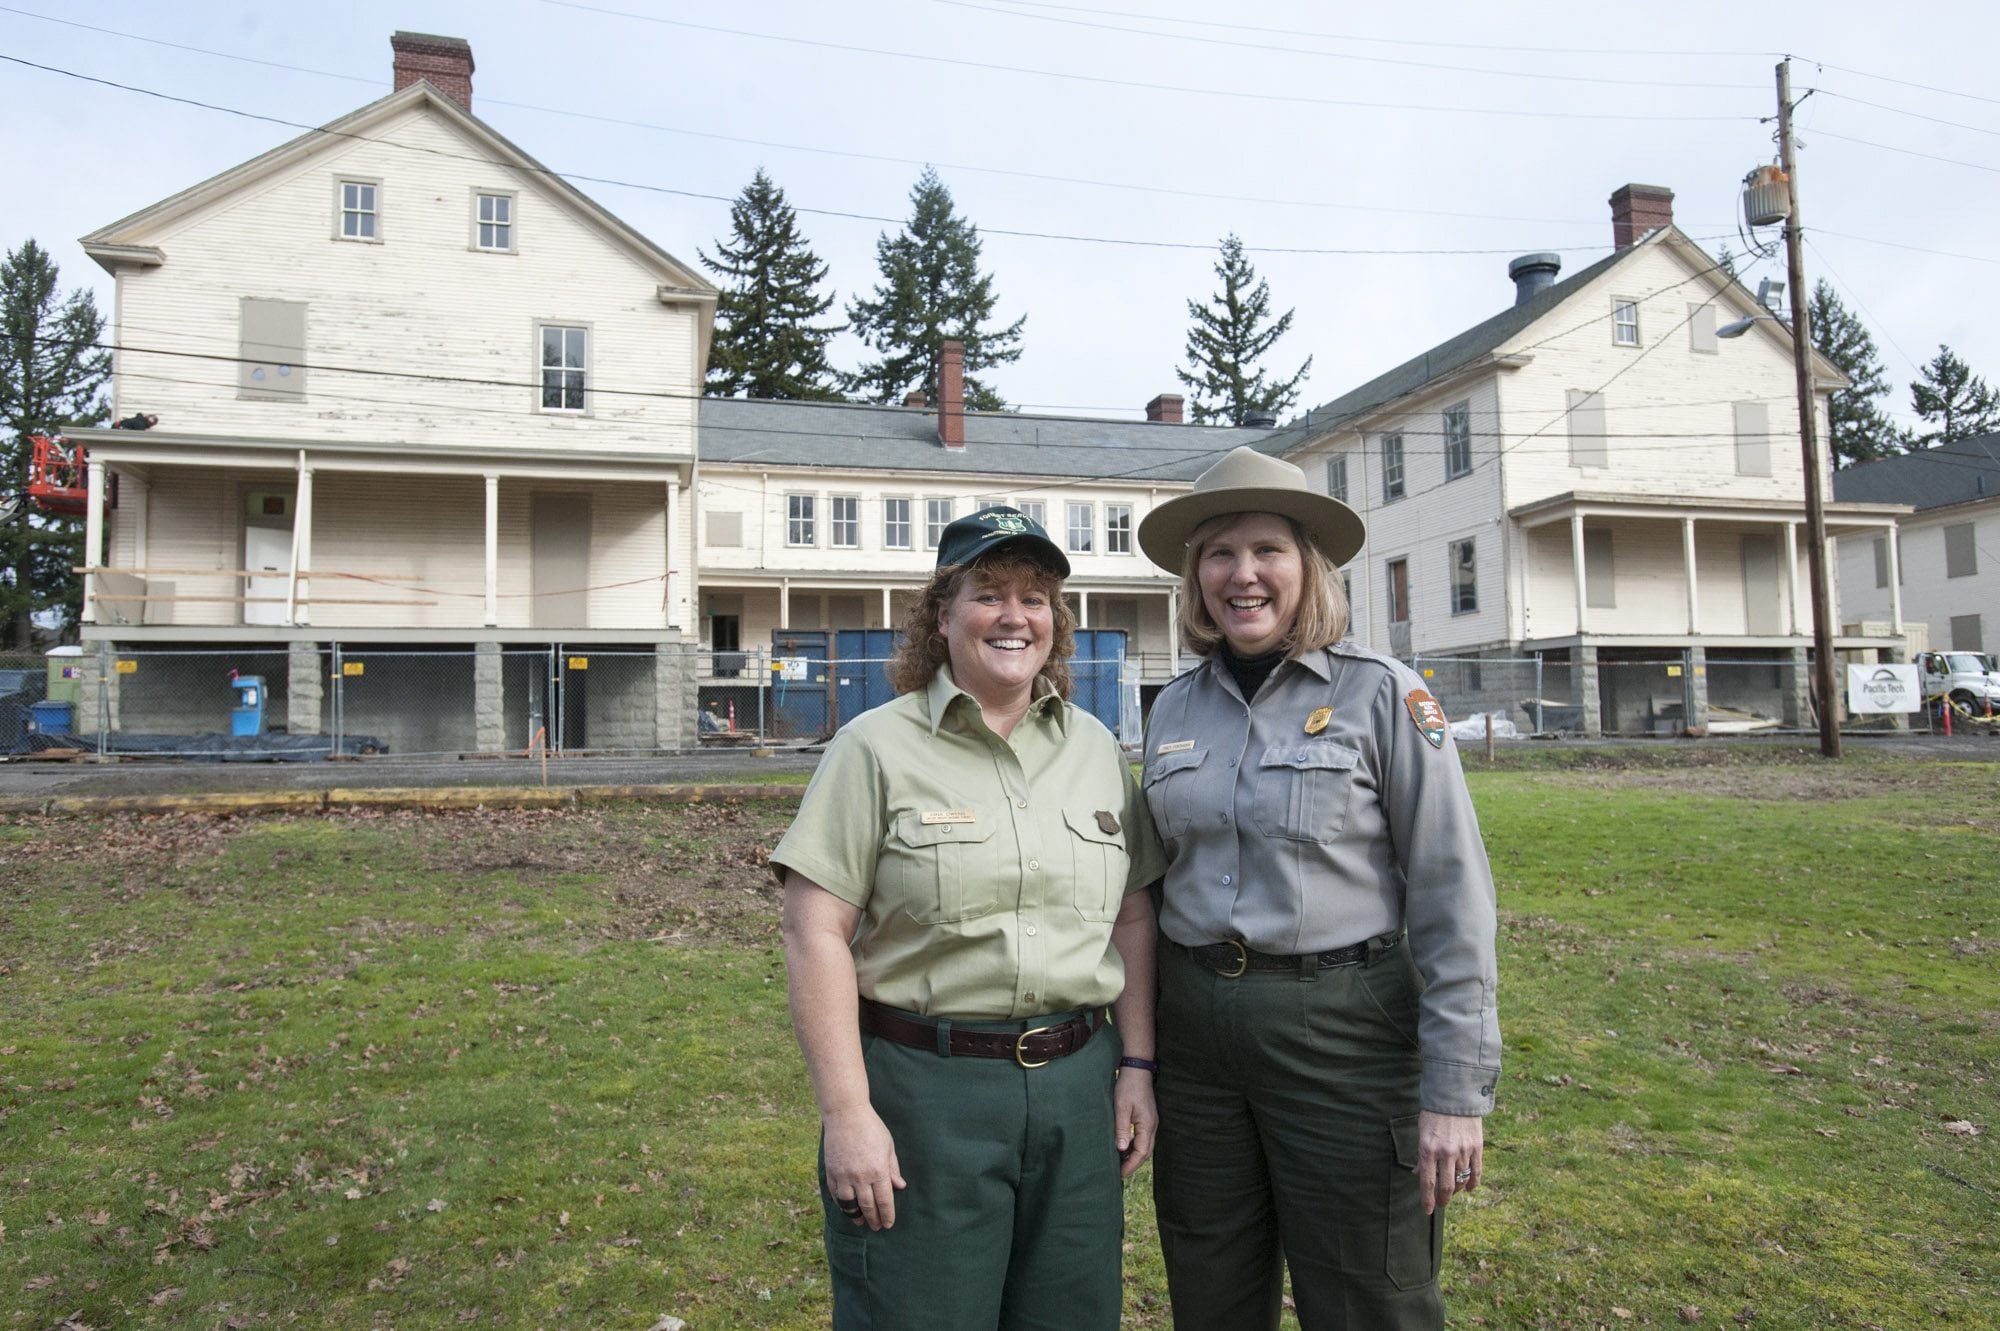 Gifford Pinchot National Forest Supervisor Gina Owens, left, stands Tuesday with National Park Service Superintendent Tracy Fortmann in front of the Gifford Pinchot&#039;s future headquarters in East Barracks Building 987 on the Fort Vancouver National Site.